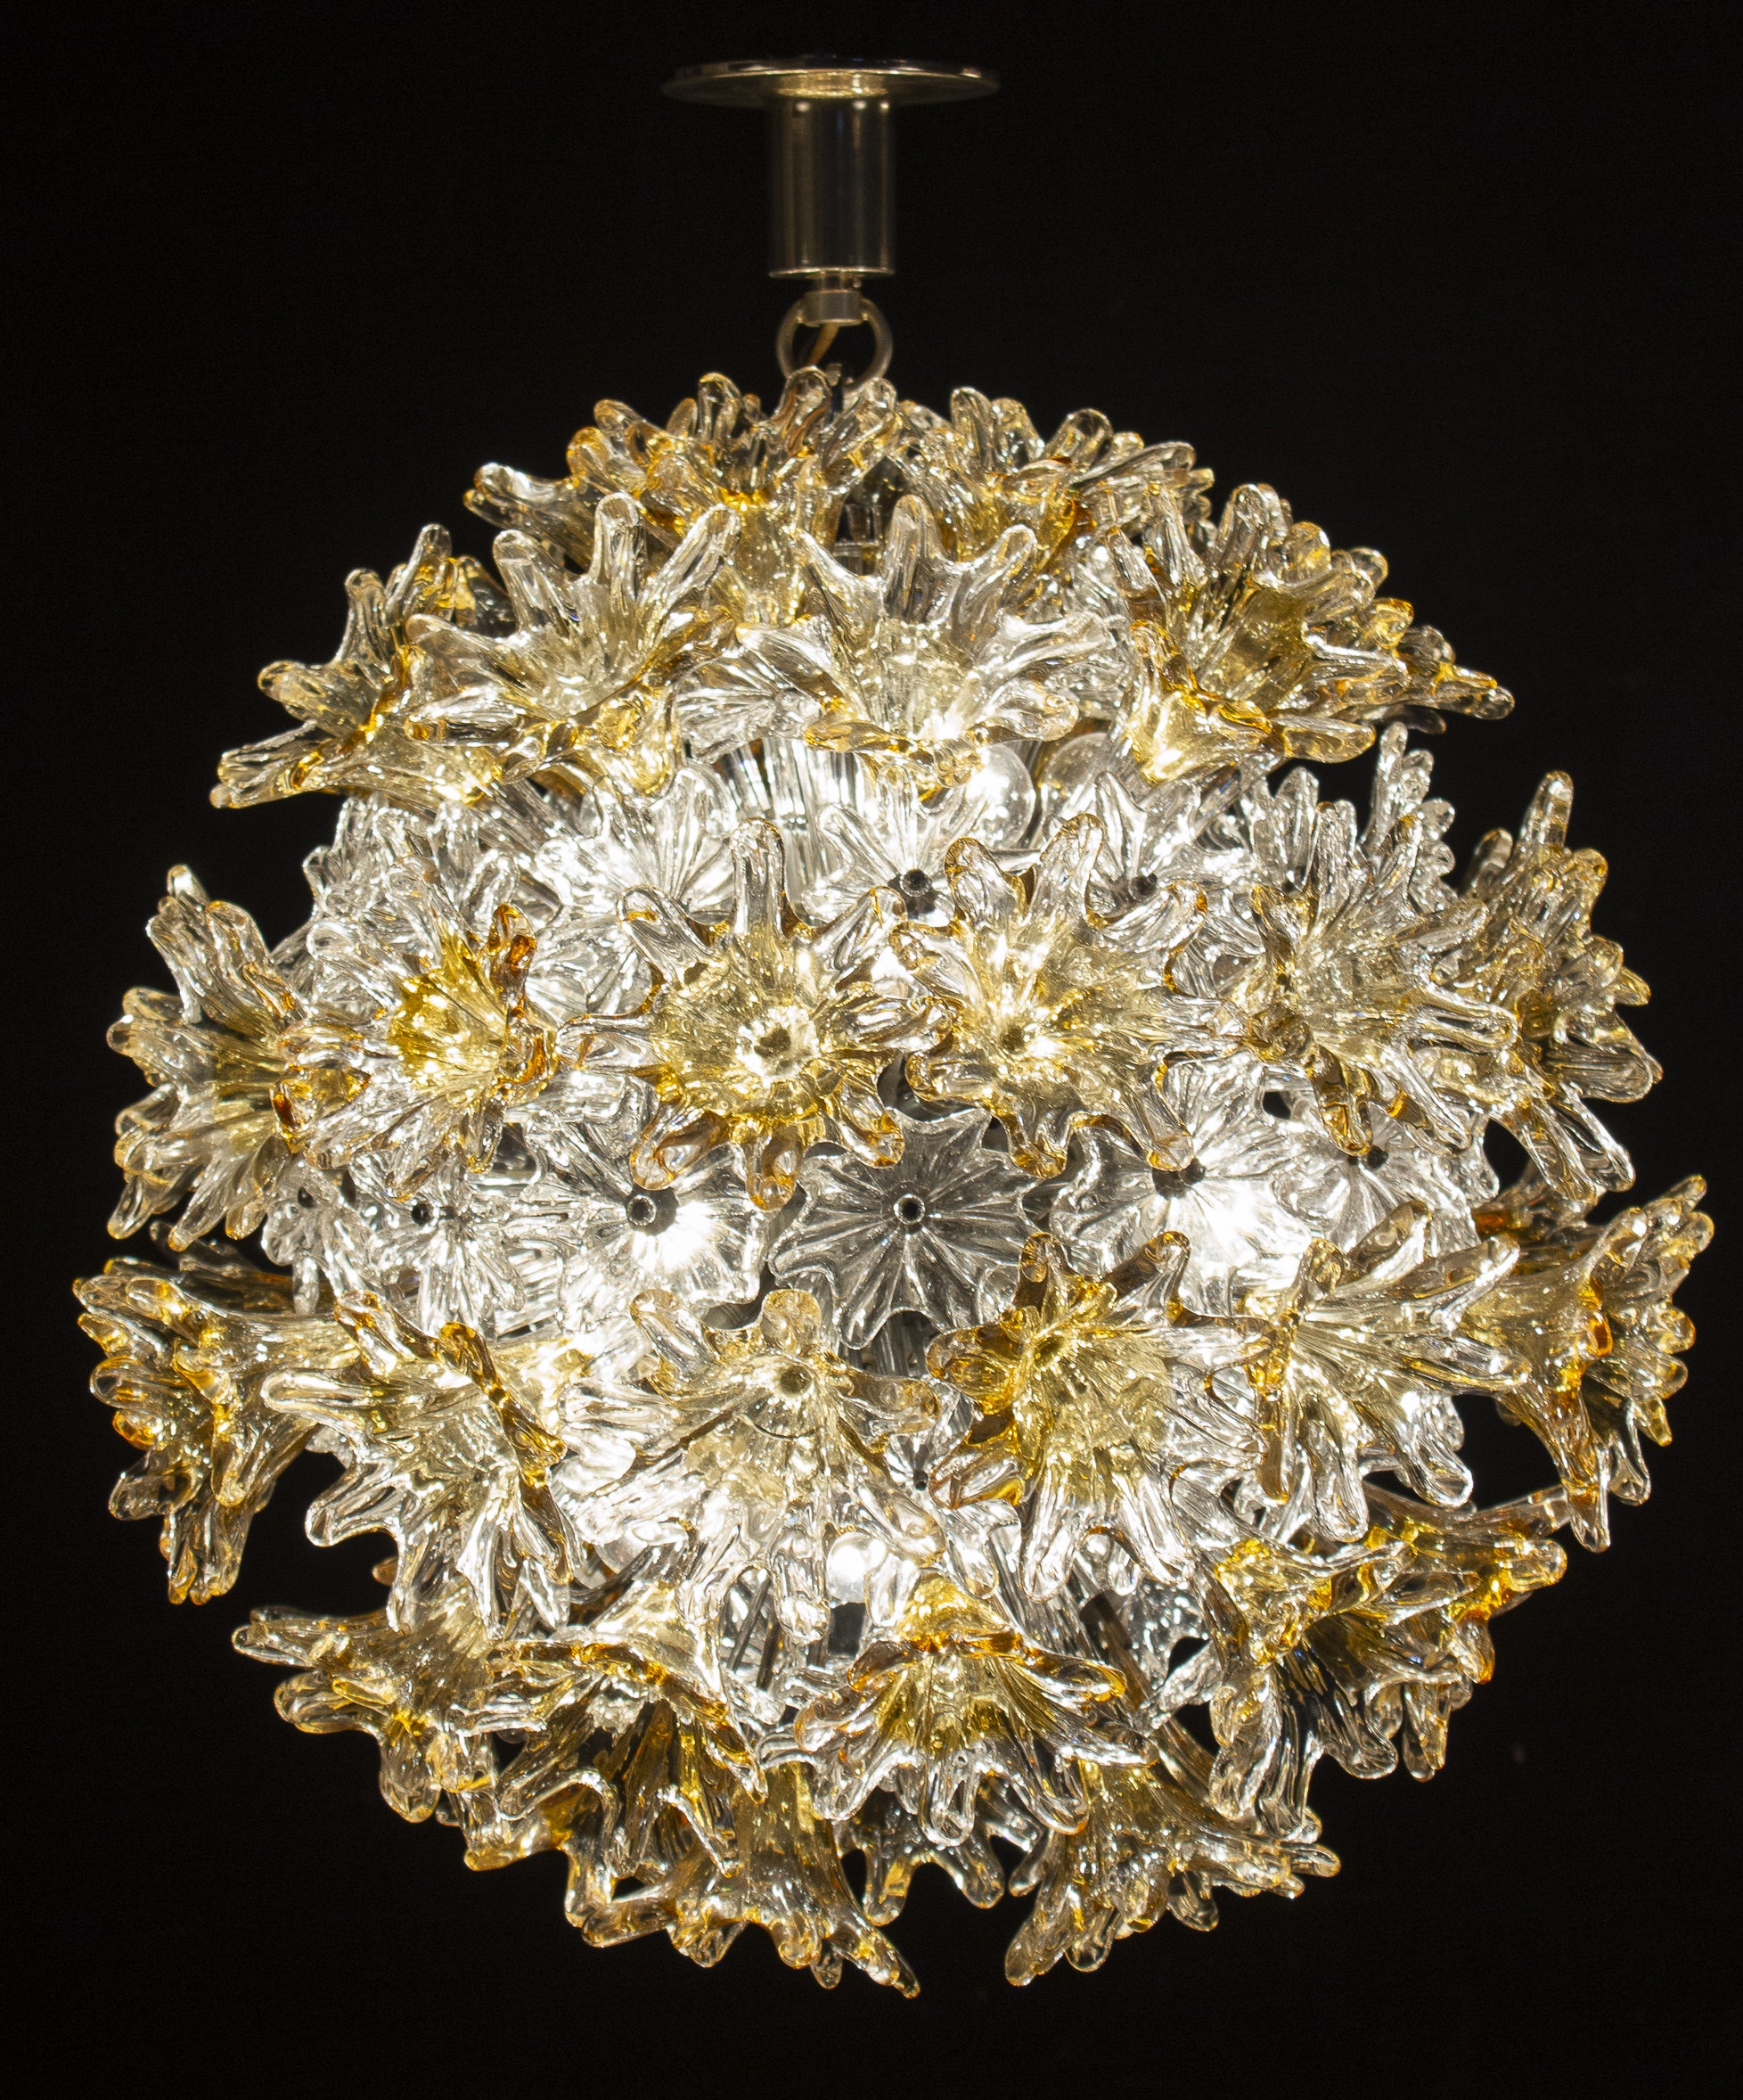 This striking esprit chandelier was produced by Venini during the 1970s.
Explosion of flowers, made with amber and clear precious Murano glasses.
Chrome frame and hardware. Available also the chain on request.
Perfect vintage condition.